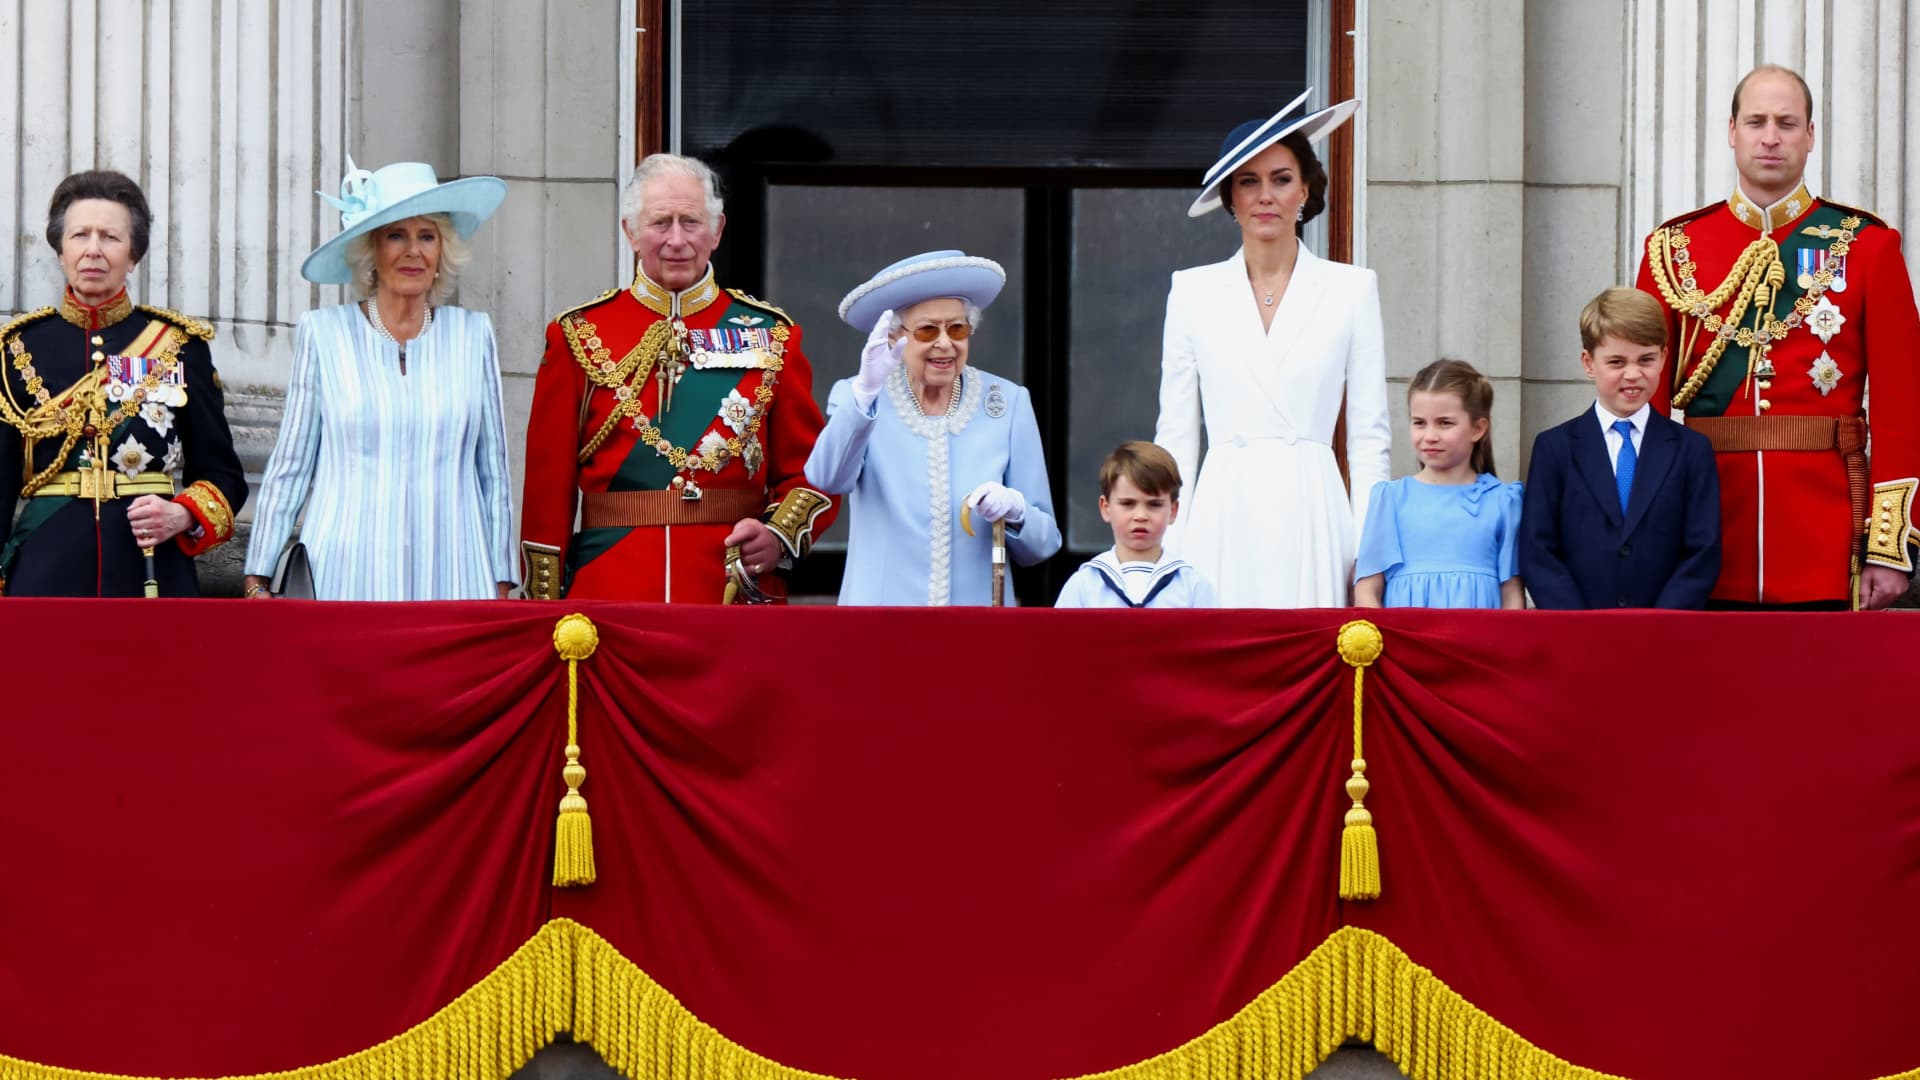 Britain's Queen Elizabeth, Anne, Princess Royal, Prince Charles, Camilla, Duchess of Cornwall, Prince William and Catherine, Duchess of Cambridge, along with Princess Charlotte, Prince George and Prince Louis appear on the balcony of Buckingham Palace as part of Trooping the Colour parade during the Queen's Platinum Jubilee celebrations in London, Britain, June 2, 2022.